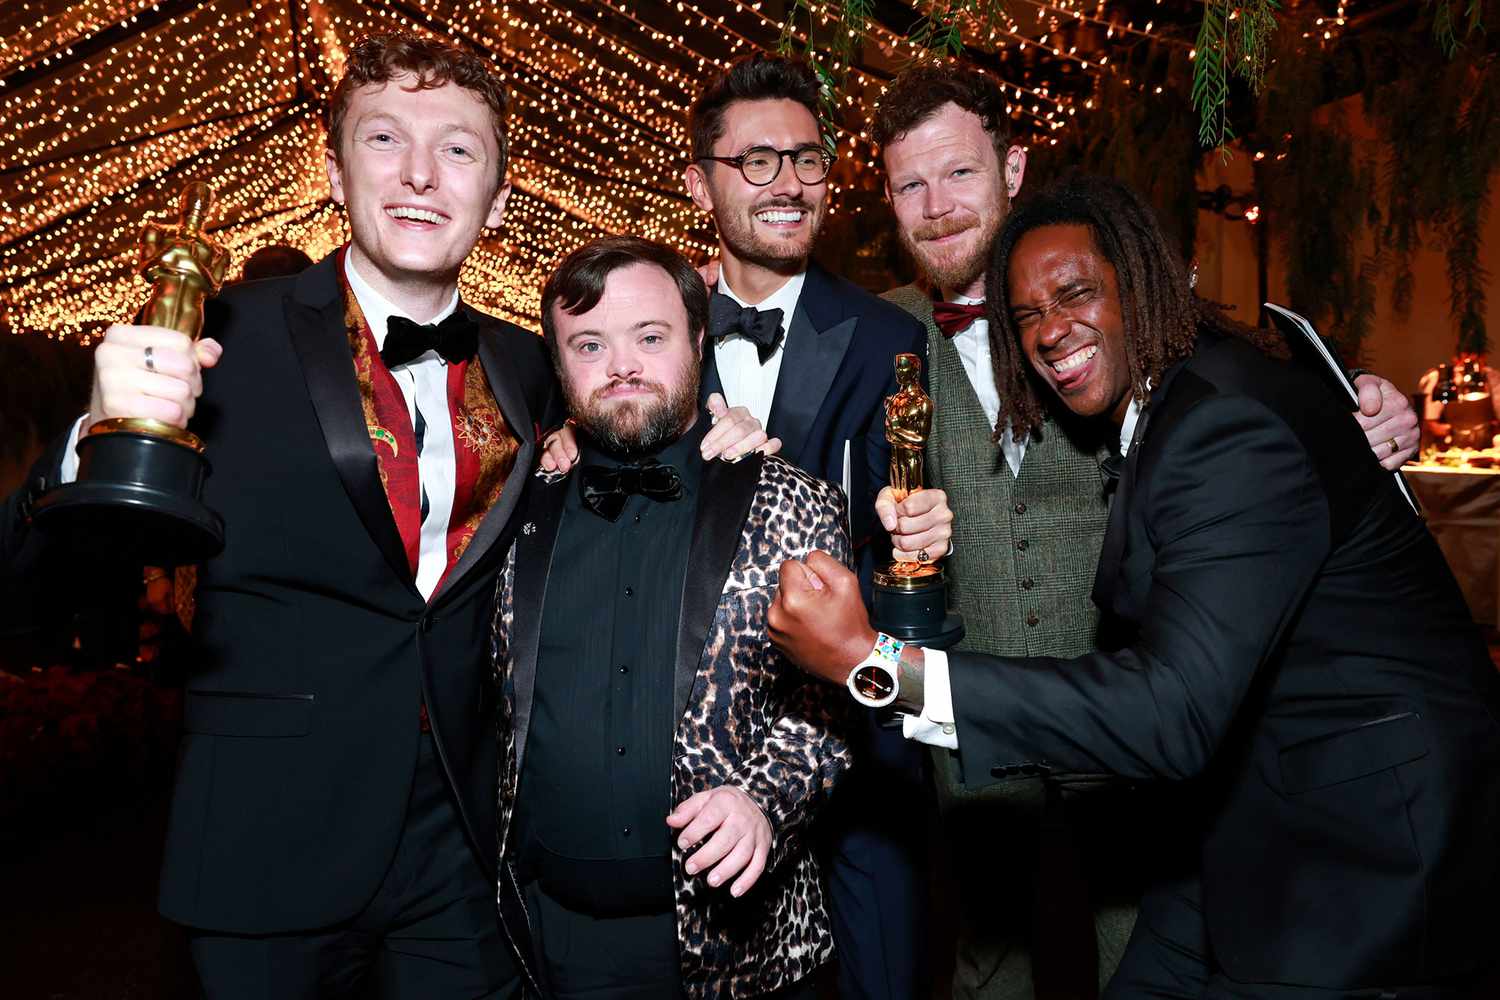 Ross White, James Martin, Tom Berkeley, Seamus O'Hara, winners of the Best Live Action Short Film award for "An Irish Goodbye" and guest attend the Governors Ball during the 95th Annual Academy Awards at Dolby Theatre on March 12, 2023 in Hollywood, California.